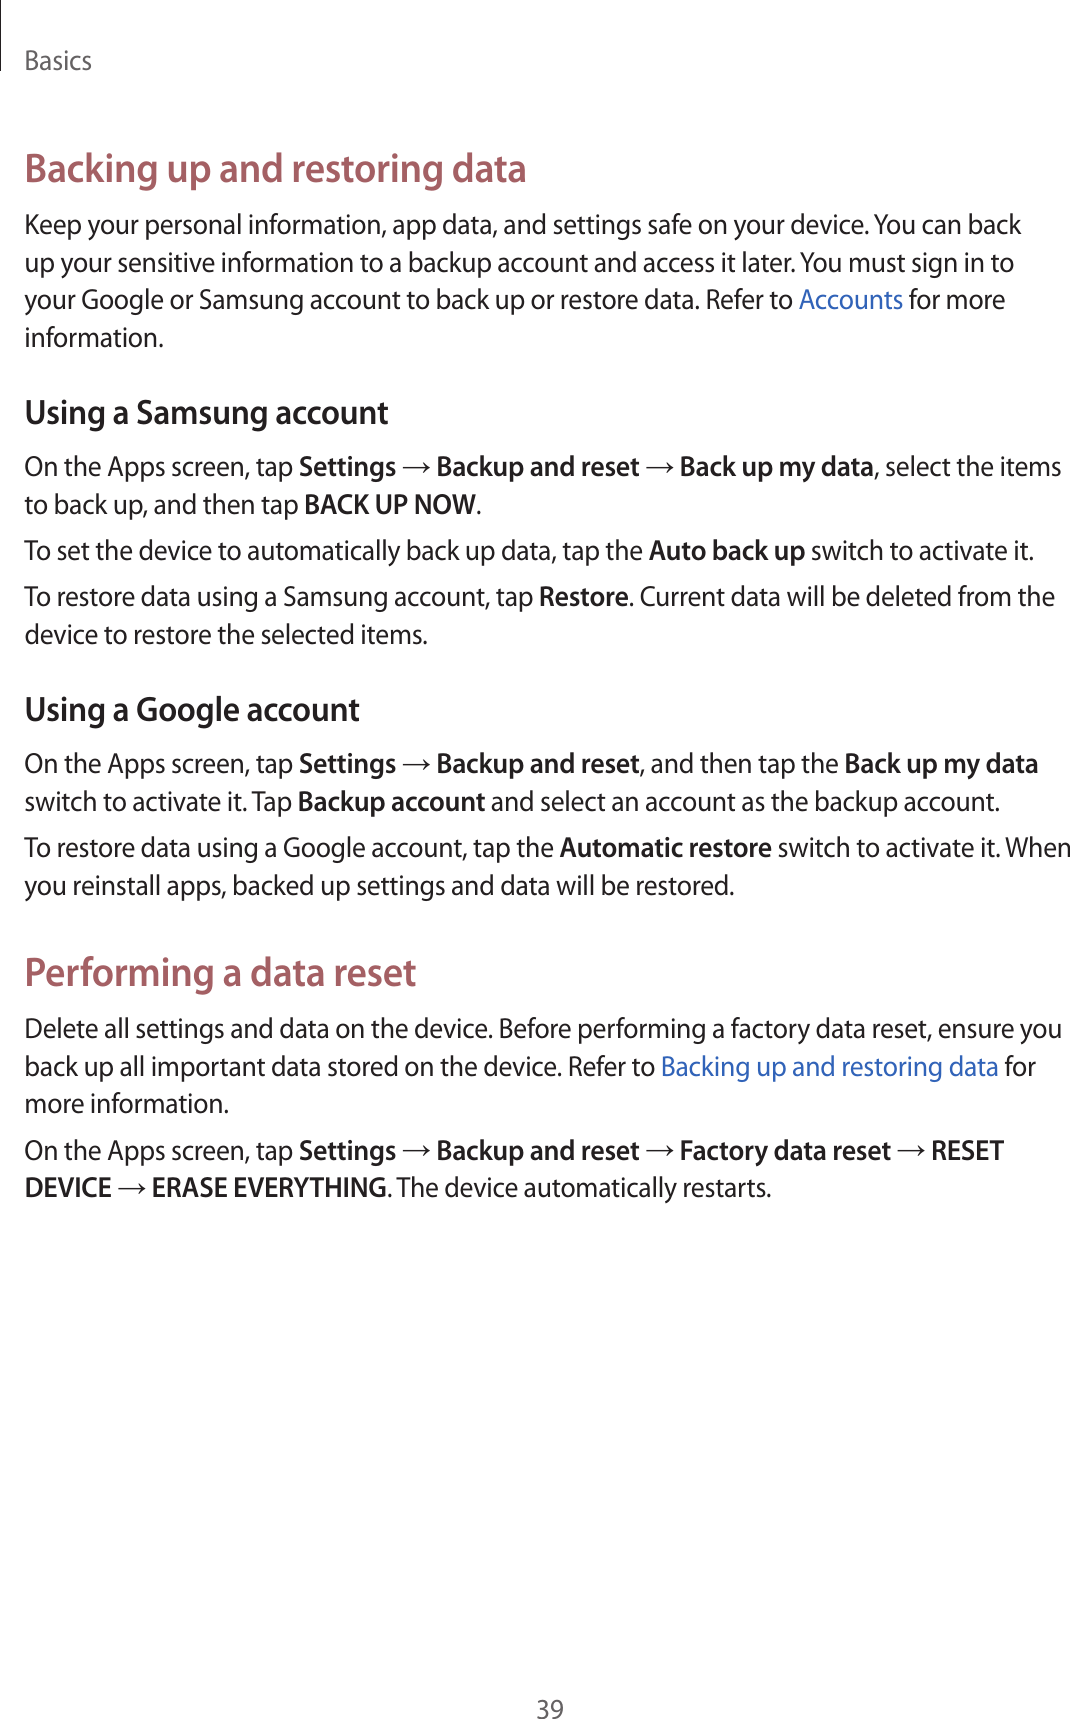 Basics39Backing up and restoring dataKeep your personal information, app data, and settings safe on your device. You can back up your sensitive information to a backup account and access it later. You must sign in to your Google or Samsung account to back up or restore data. Refer to Accounts for more information.Using a Samsung accountOn the Apps screen, tap Settings → Backup and reset → Back up my data, select the items to back up, and then tap BACK UP NOW.To set the device to automatically back up data, tap the Auto back up switch to activate it.To restore data using a Samsung account, tap Restore. Current data will be deleted from the device to restore the selected items.Using a Google accountOn the Apps screen, tap Settings → Backup and reset, and then tap the Back up my data switch to activate it. Tap Backup account and select an account as the backup account.To restore data using a Google account, tap the Automatic restore switch to activate it. When you reinstall apps, backed up settings and data will be restored.Performing a data resetDelete all settings and data on the device. Before performing a factory data reset, ensure you back up all important data stored on the device. Refer to Backing up and restoring data for more information.On the Apps screen, tap Settings → Backup and reset → Factory data reset → RESET DEVICE → ERASE EVERYTHING. The device automatically restarts.